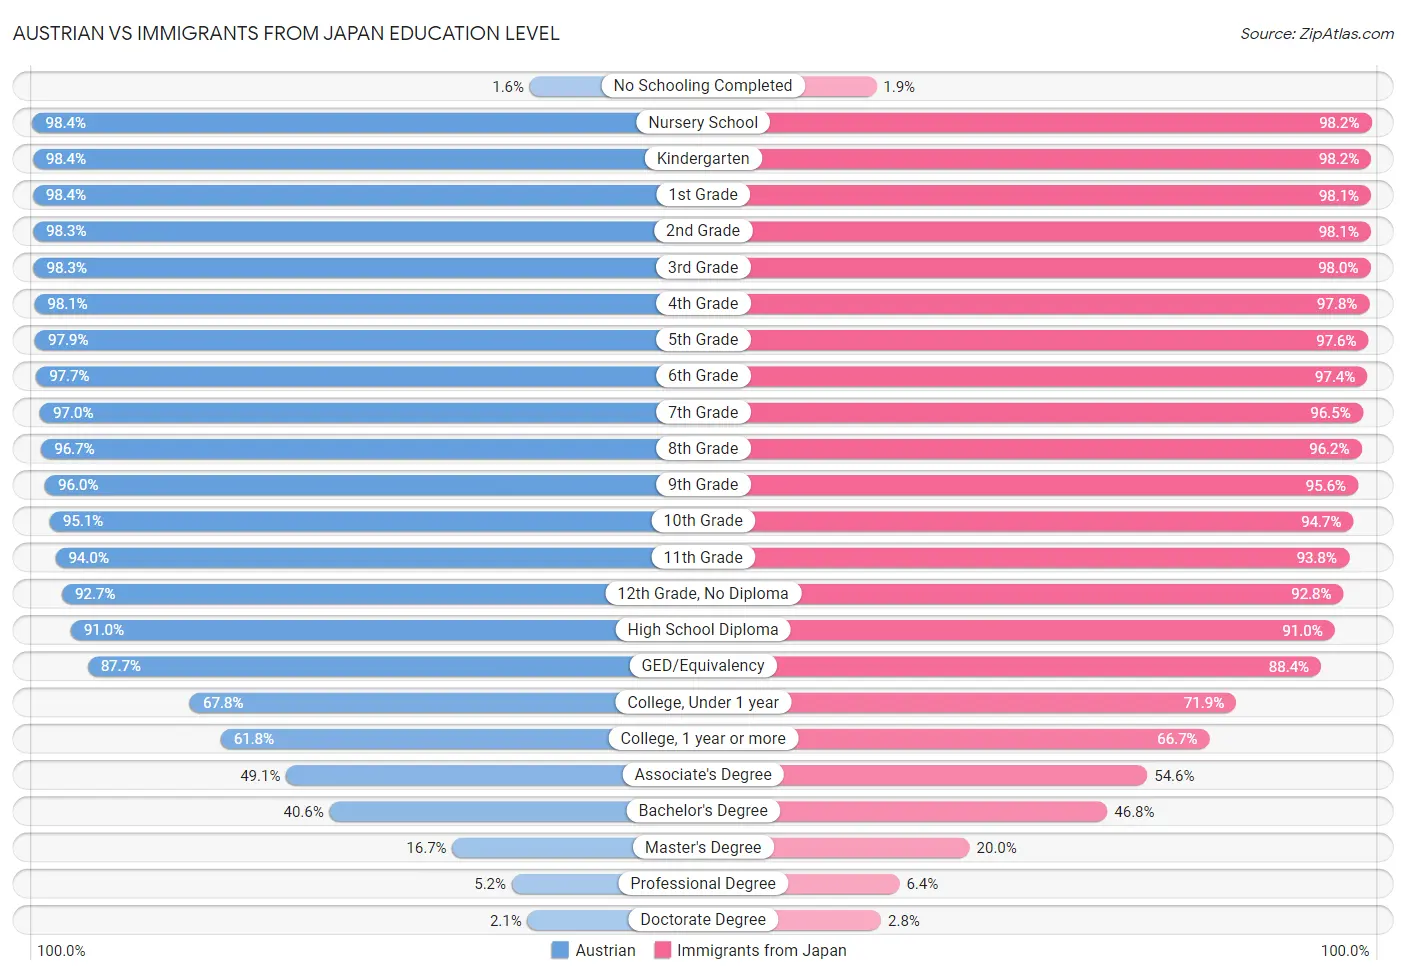 Austrian vs Immigrants from Japan Education Level